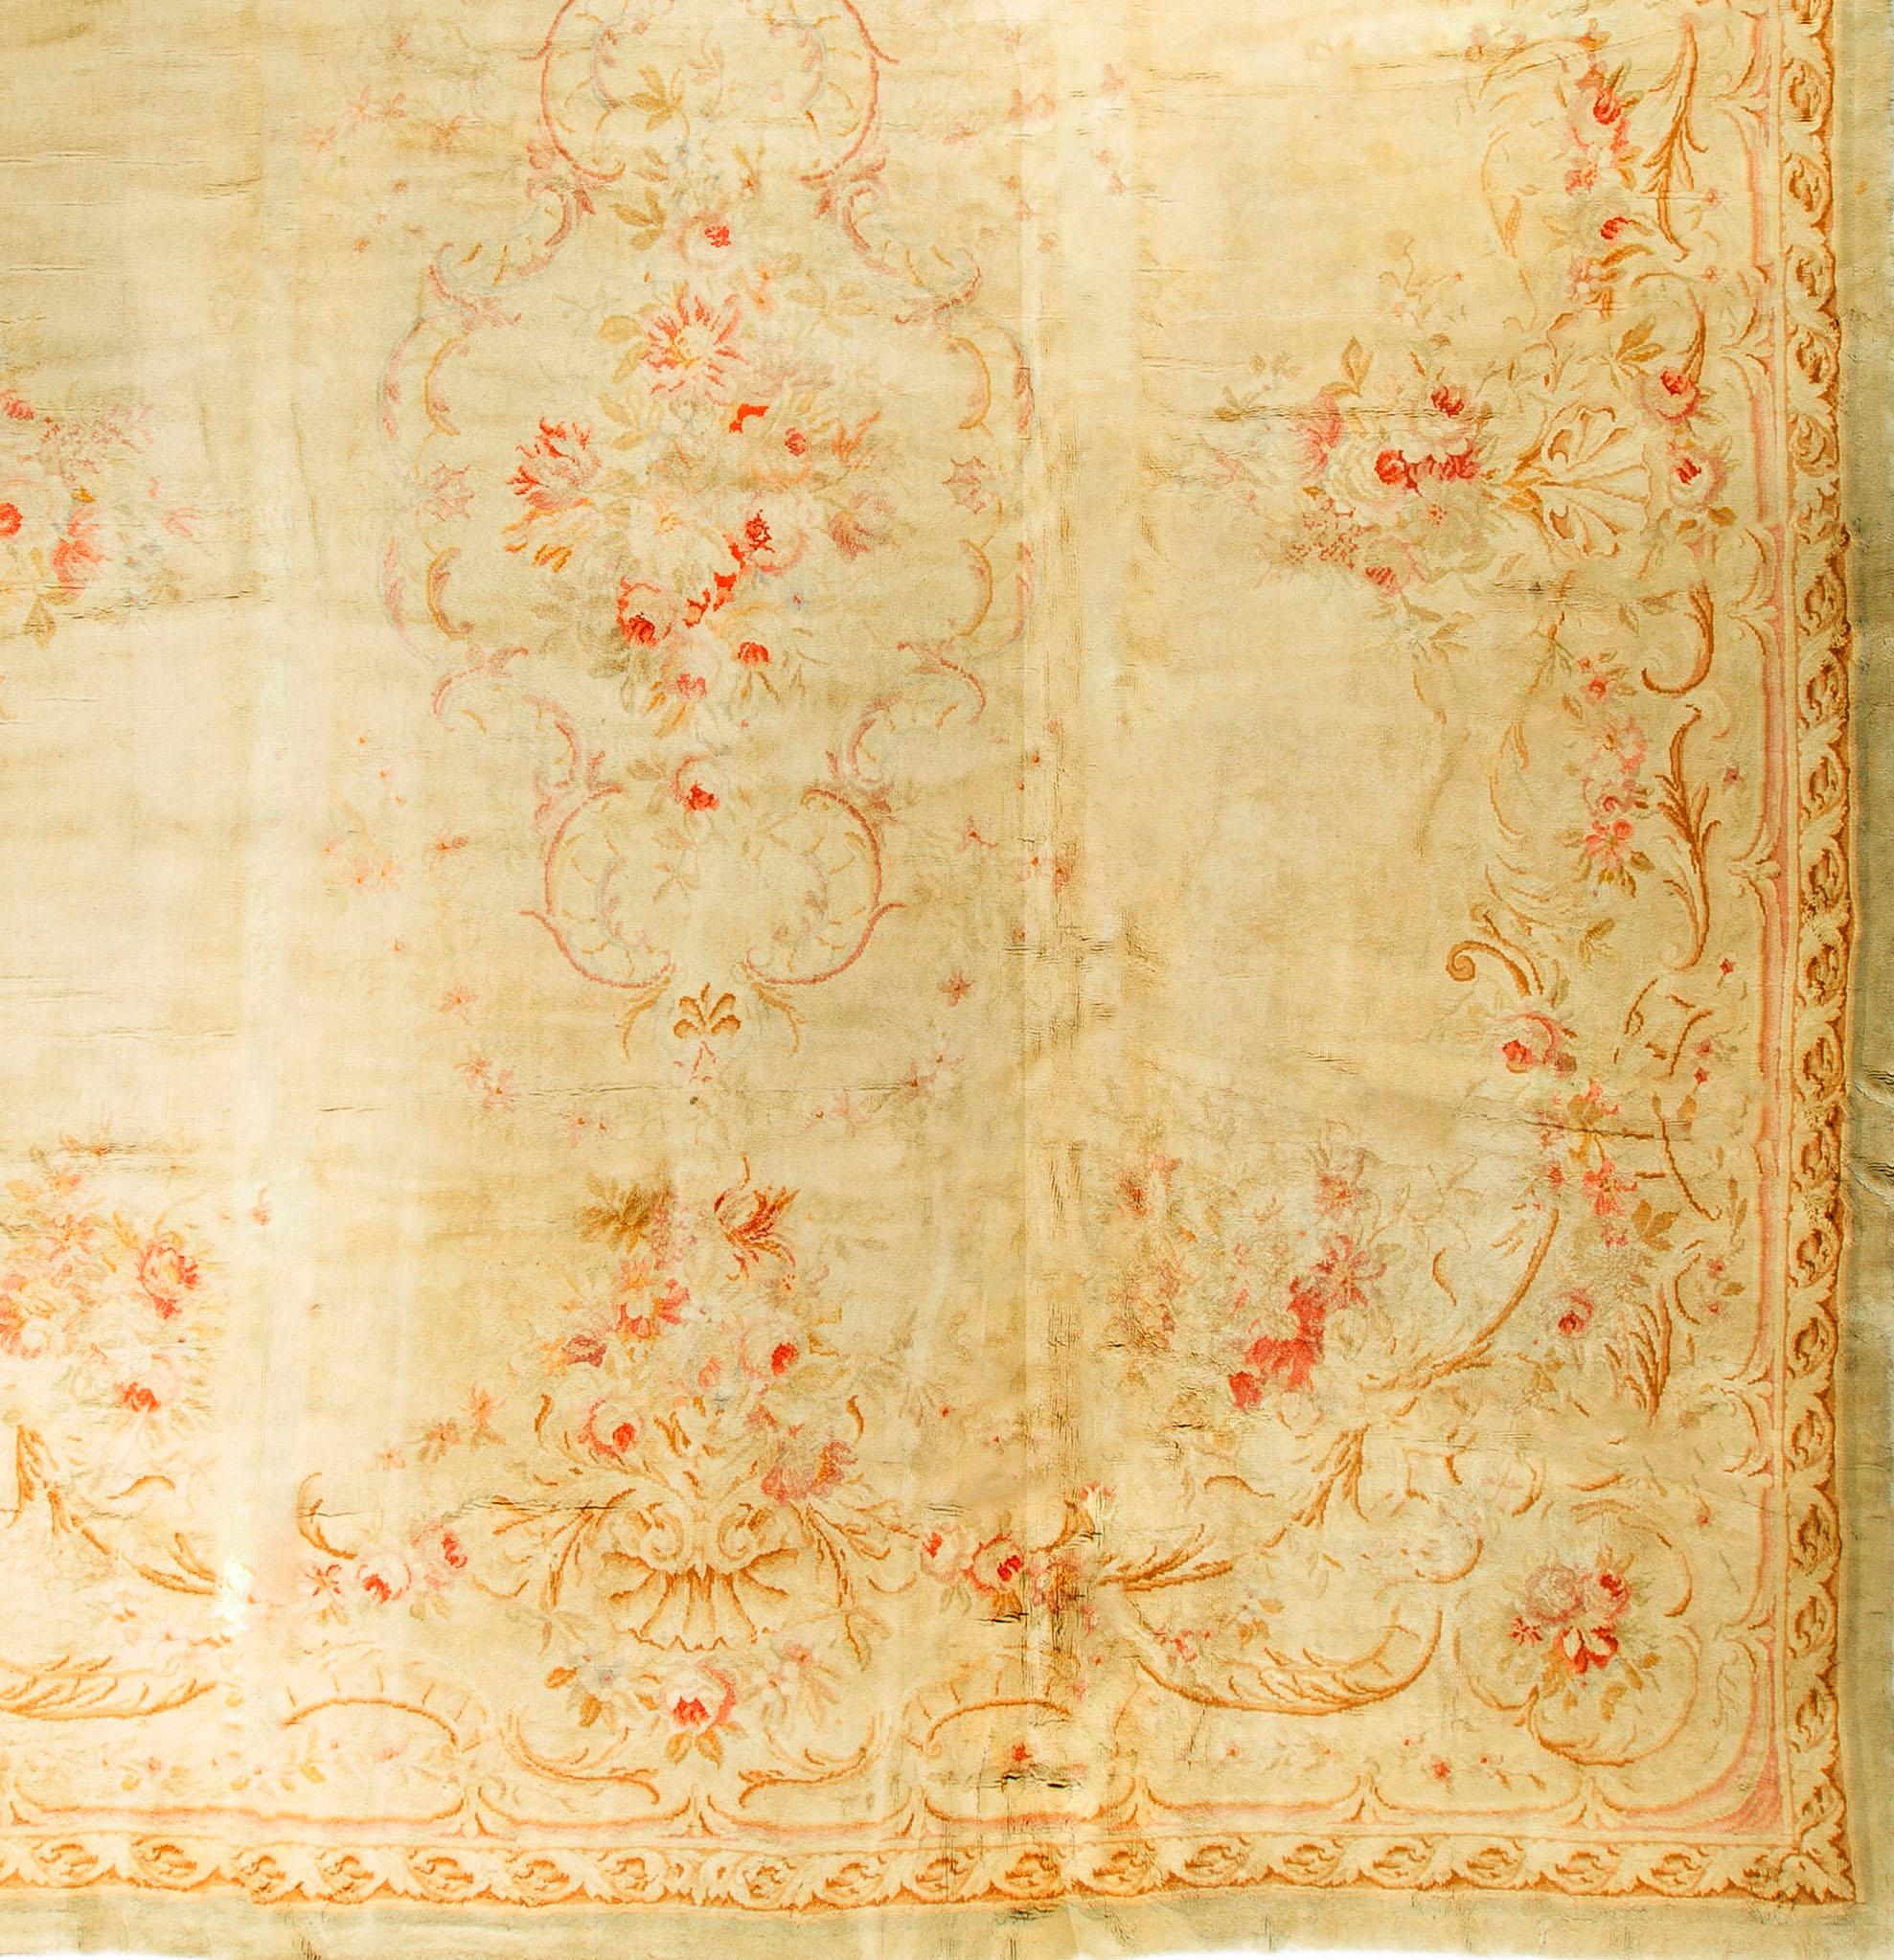 Hand-Woven French Oversize Savonnerie Rug Carpet, circa 1890 For Sale